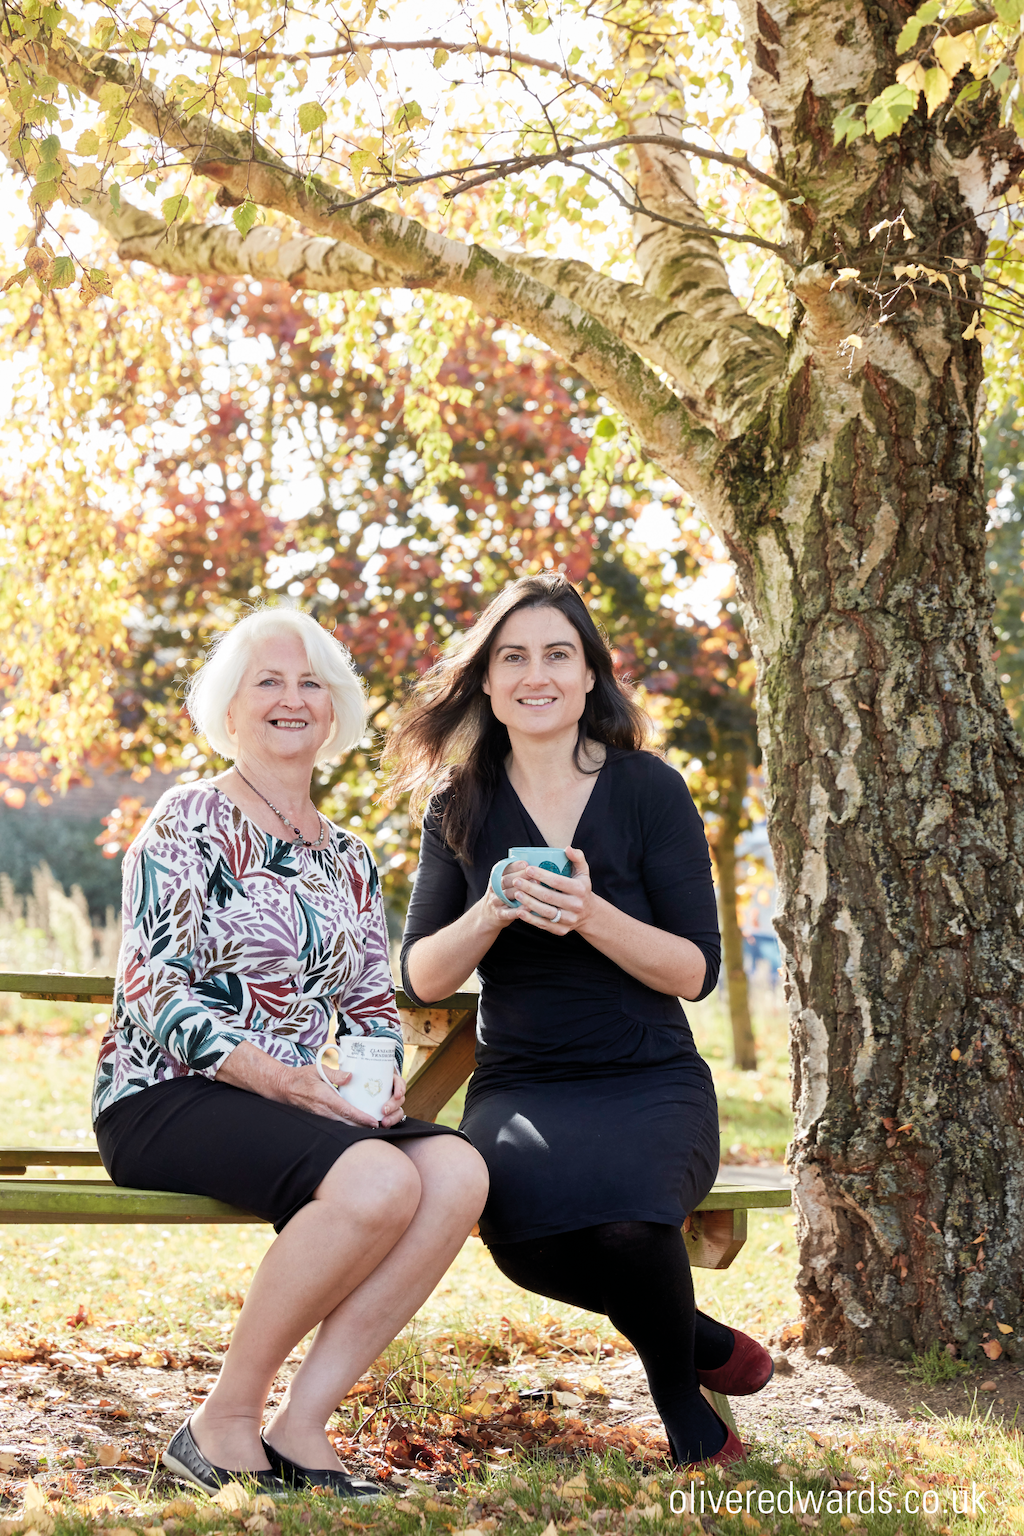 Odylique Founder Margaret with her daughter and co-owner Abbie, sitting on a bench under a tree in autumn.